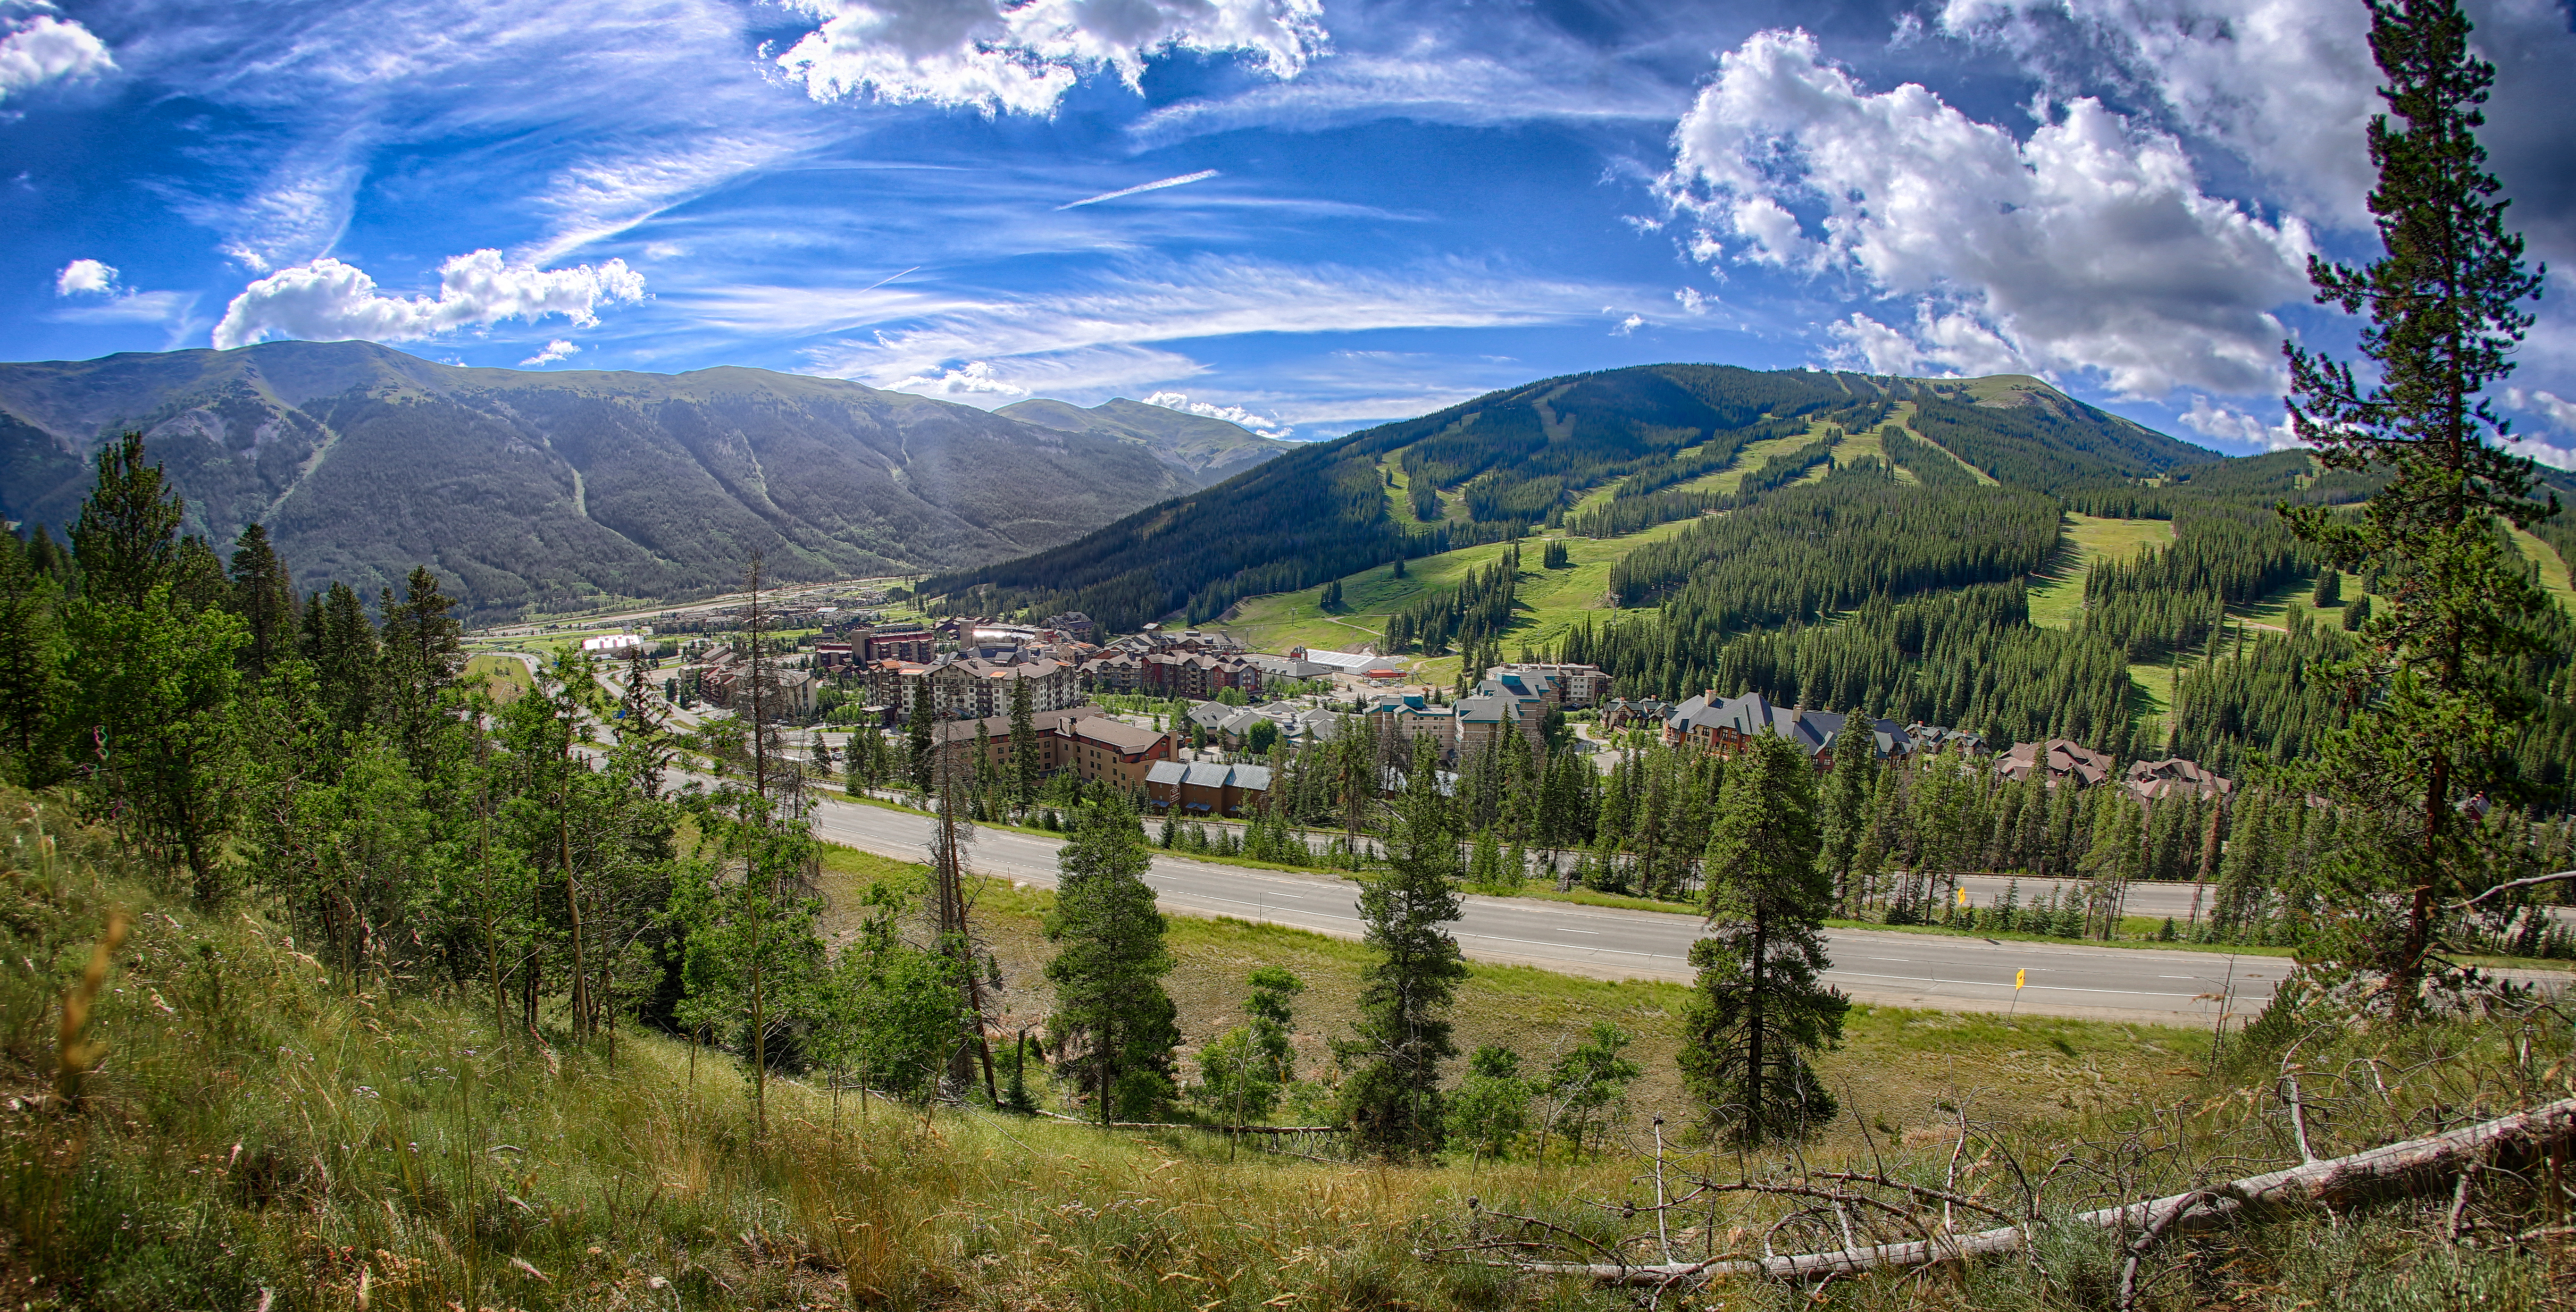 Photo Credit to Copper Mountain Resort